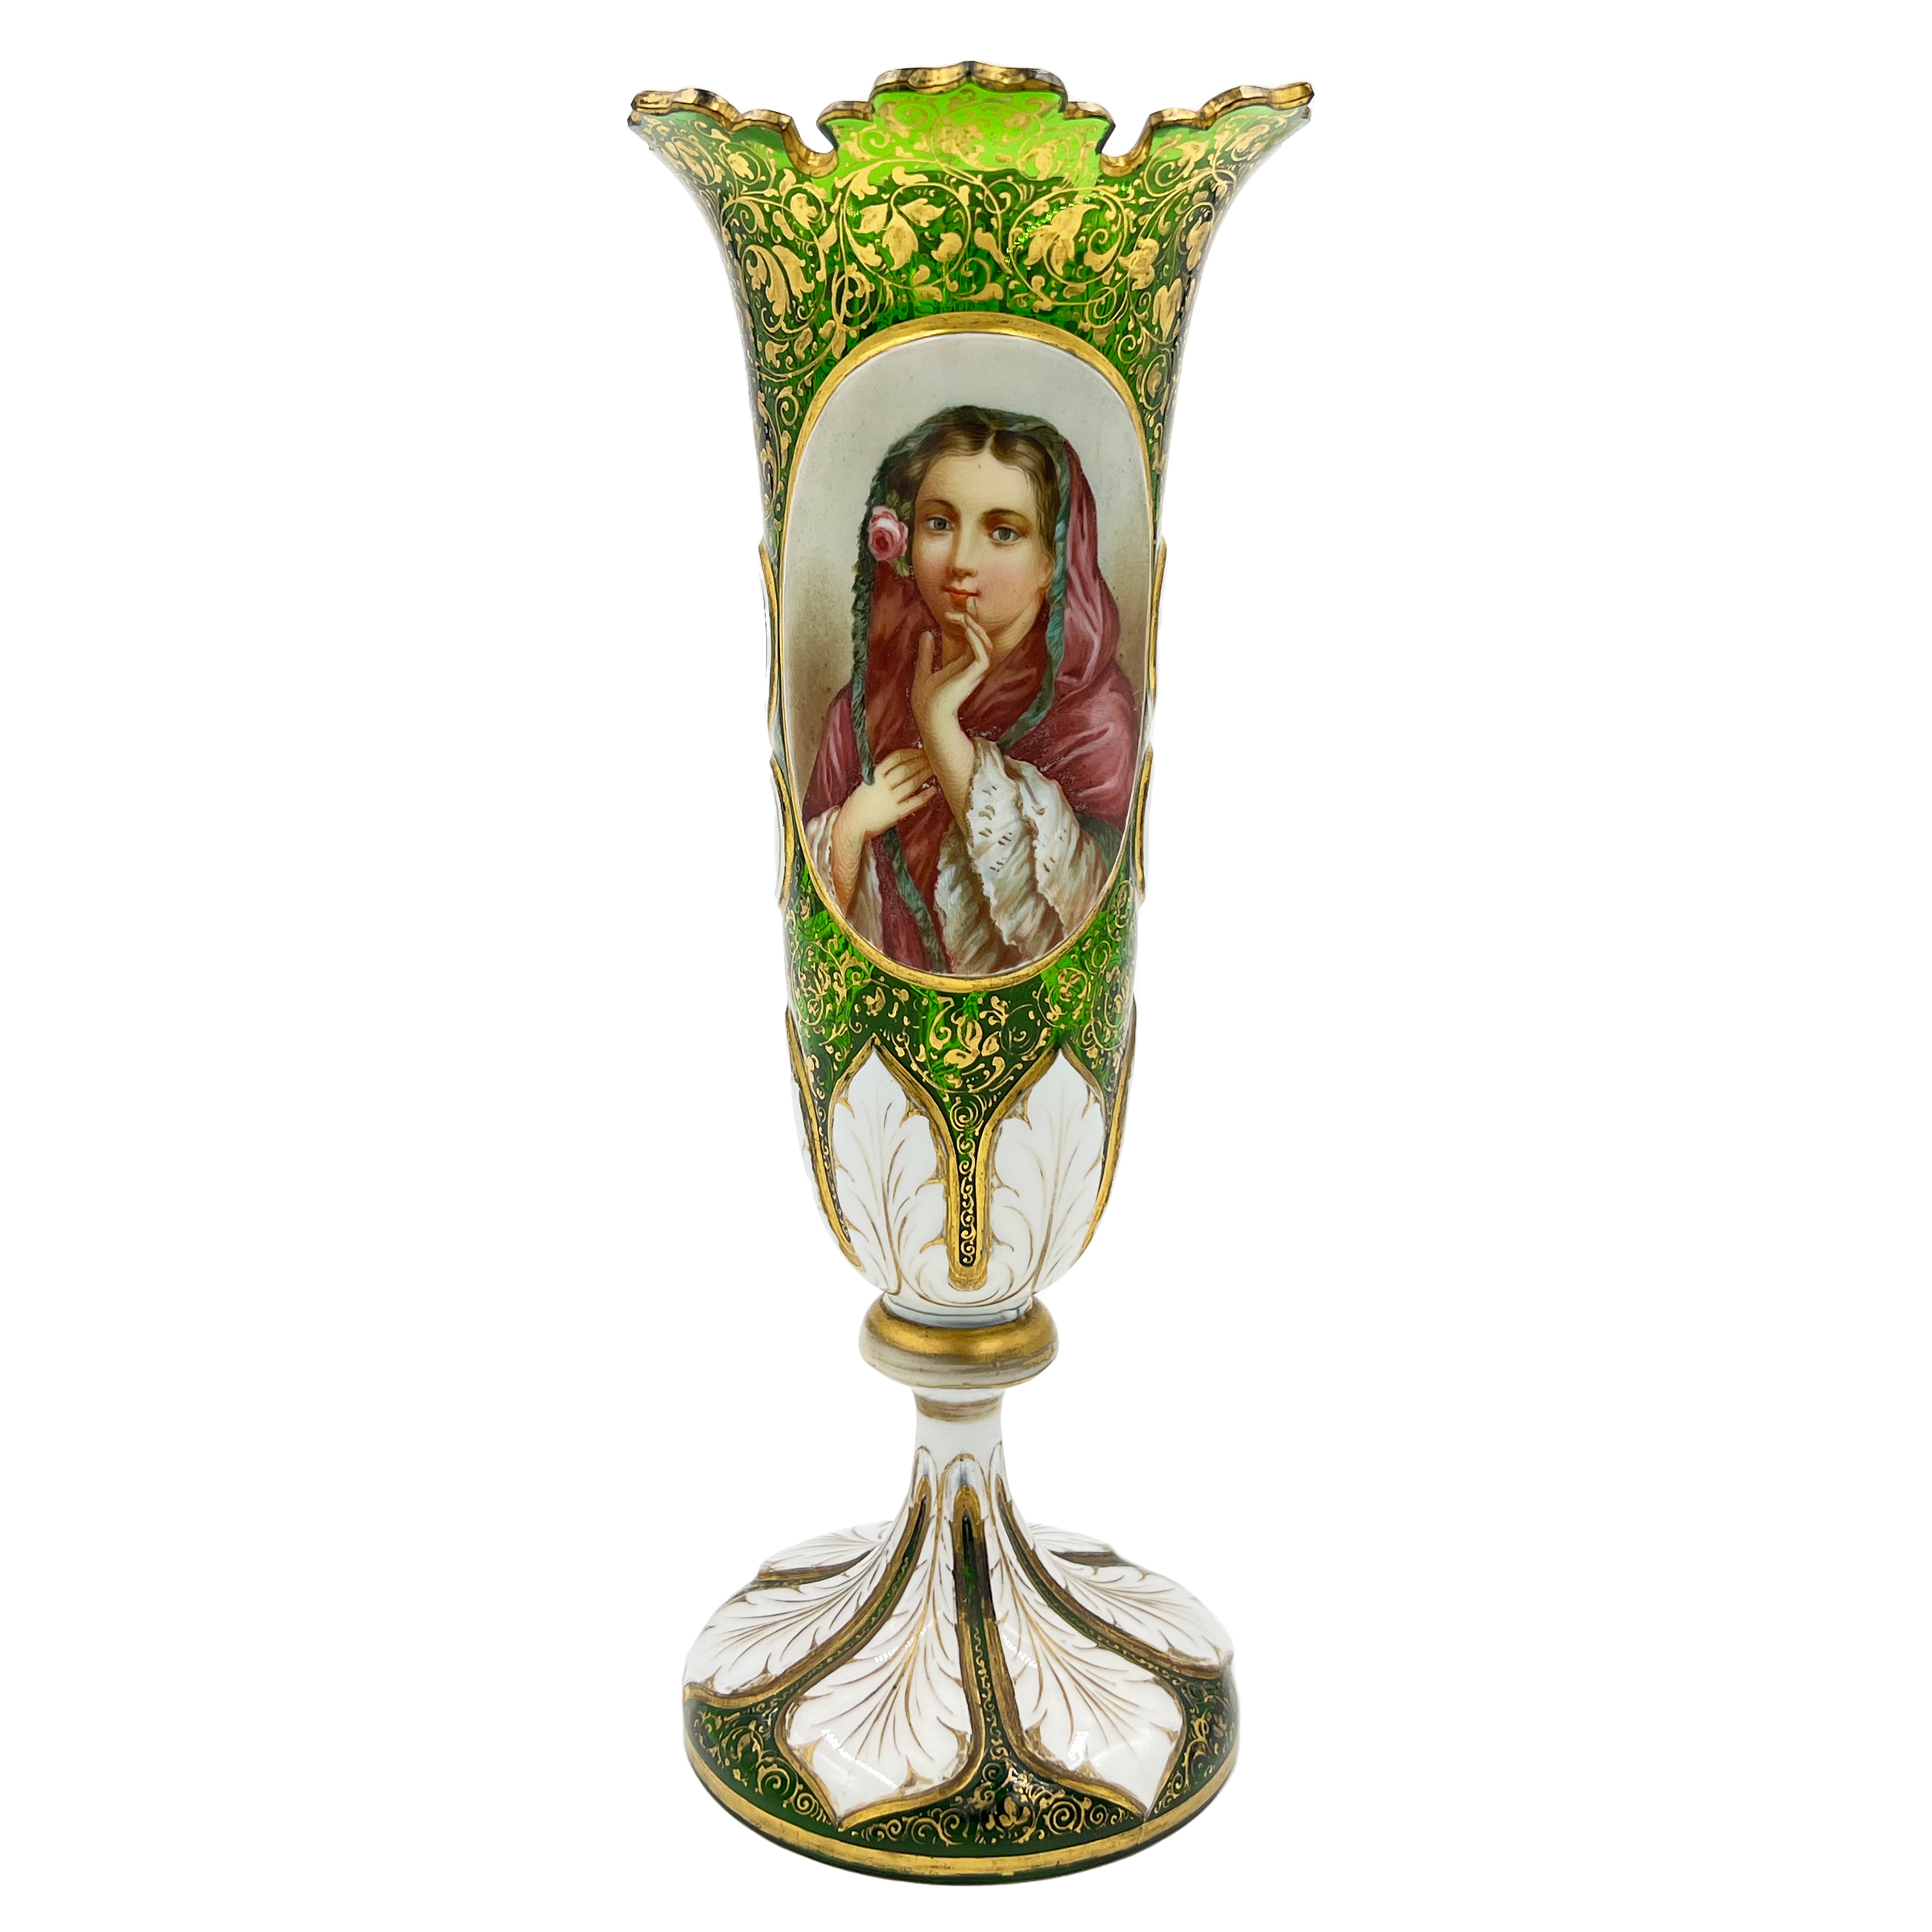 19TH CENTURY BOHEMIAN GLASS VASE WITH GOLD GILDING